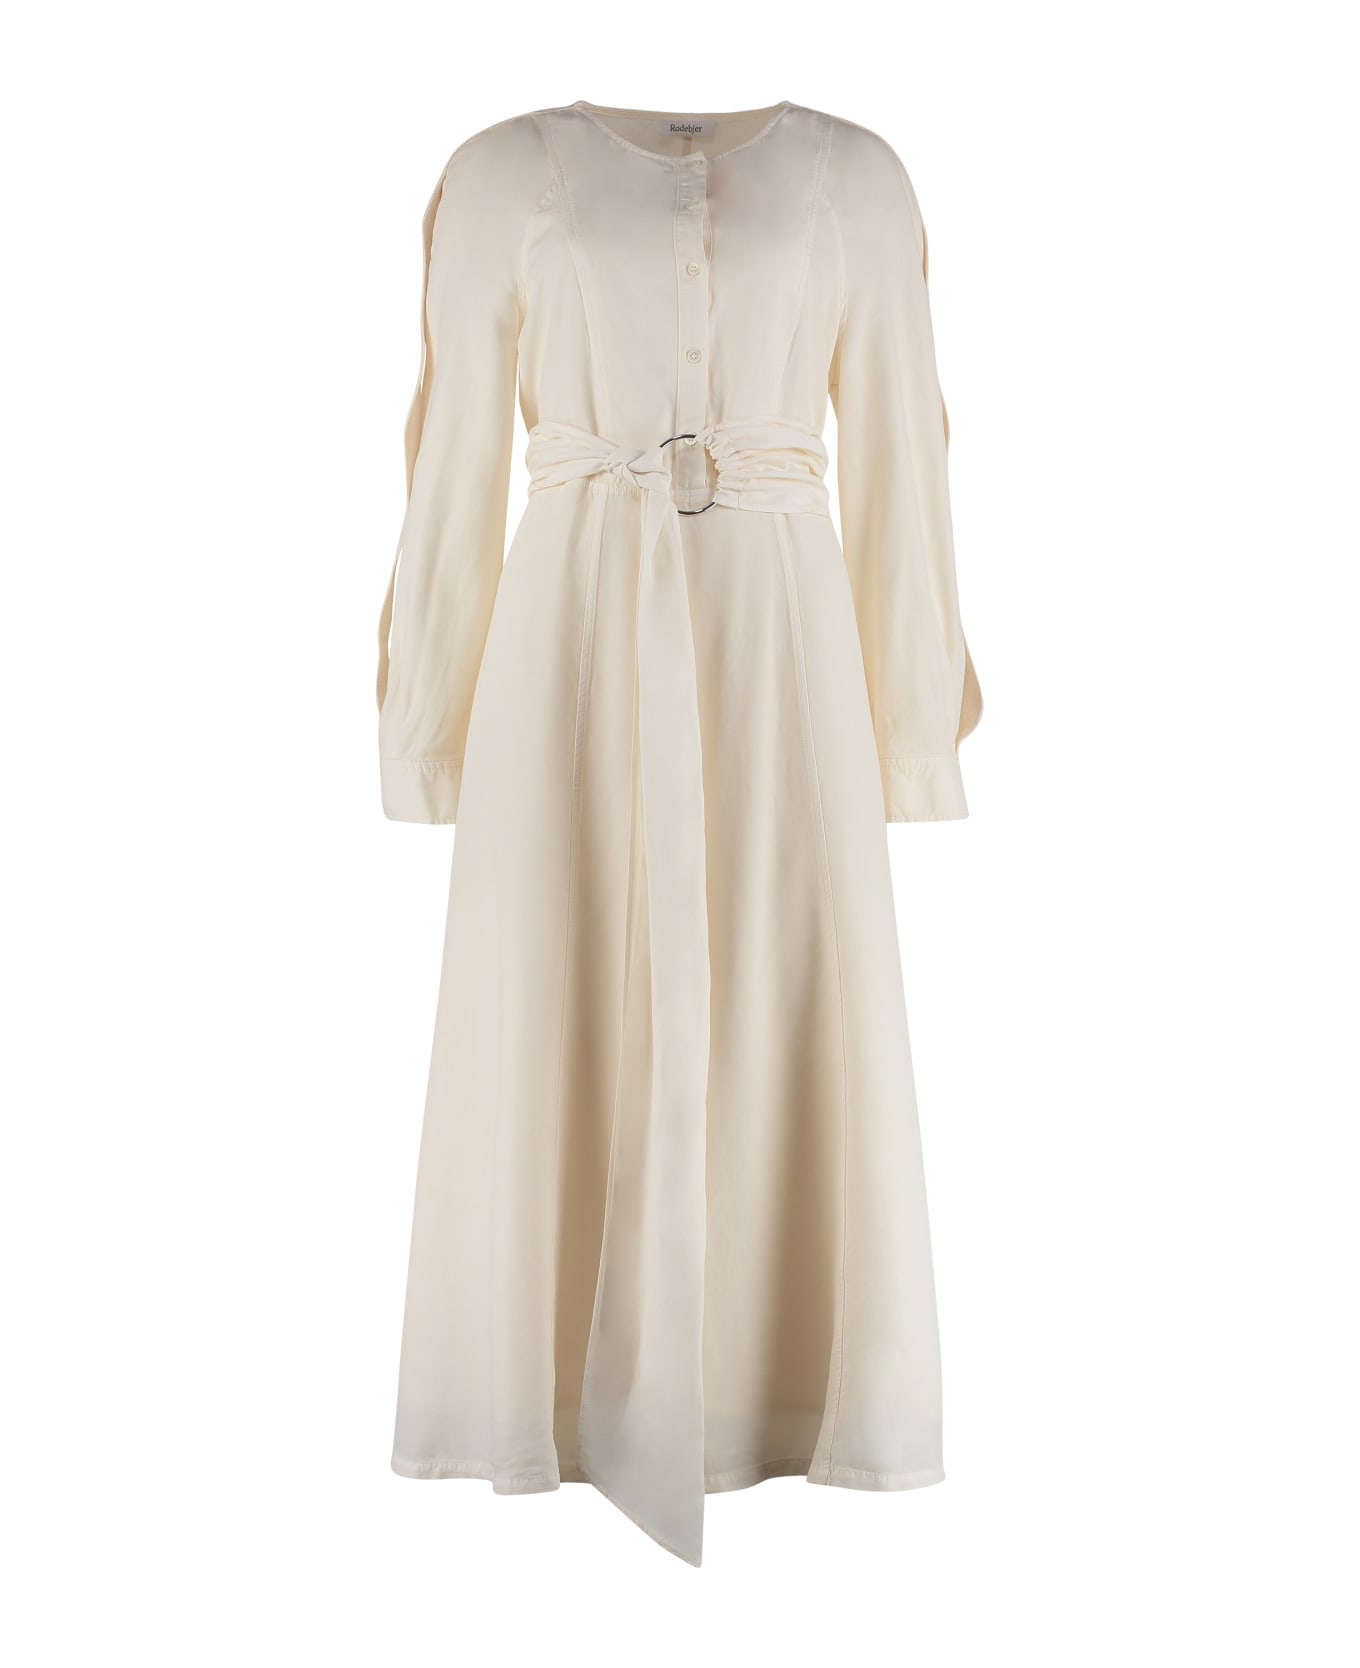 Rodebjer Belted Shirtdress - WHITE